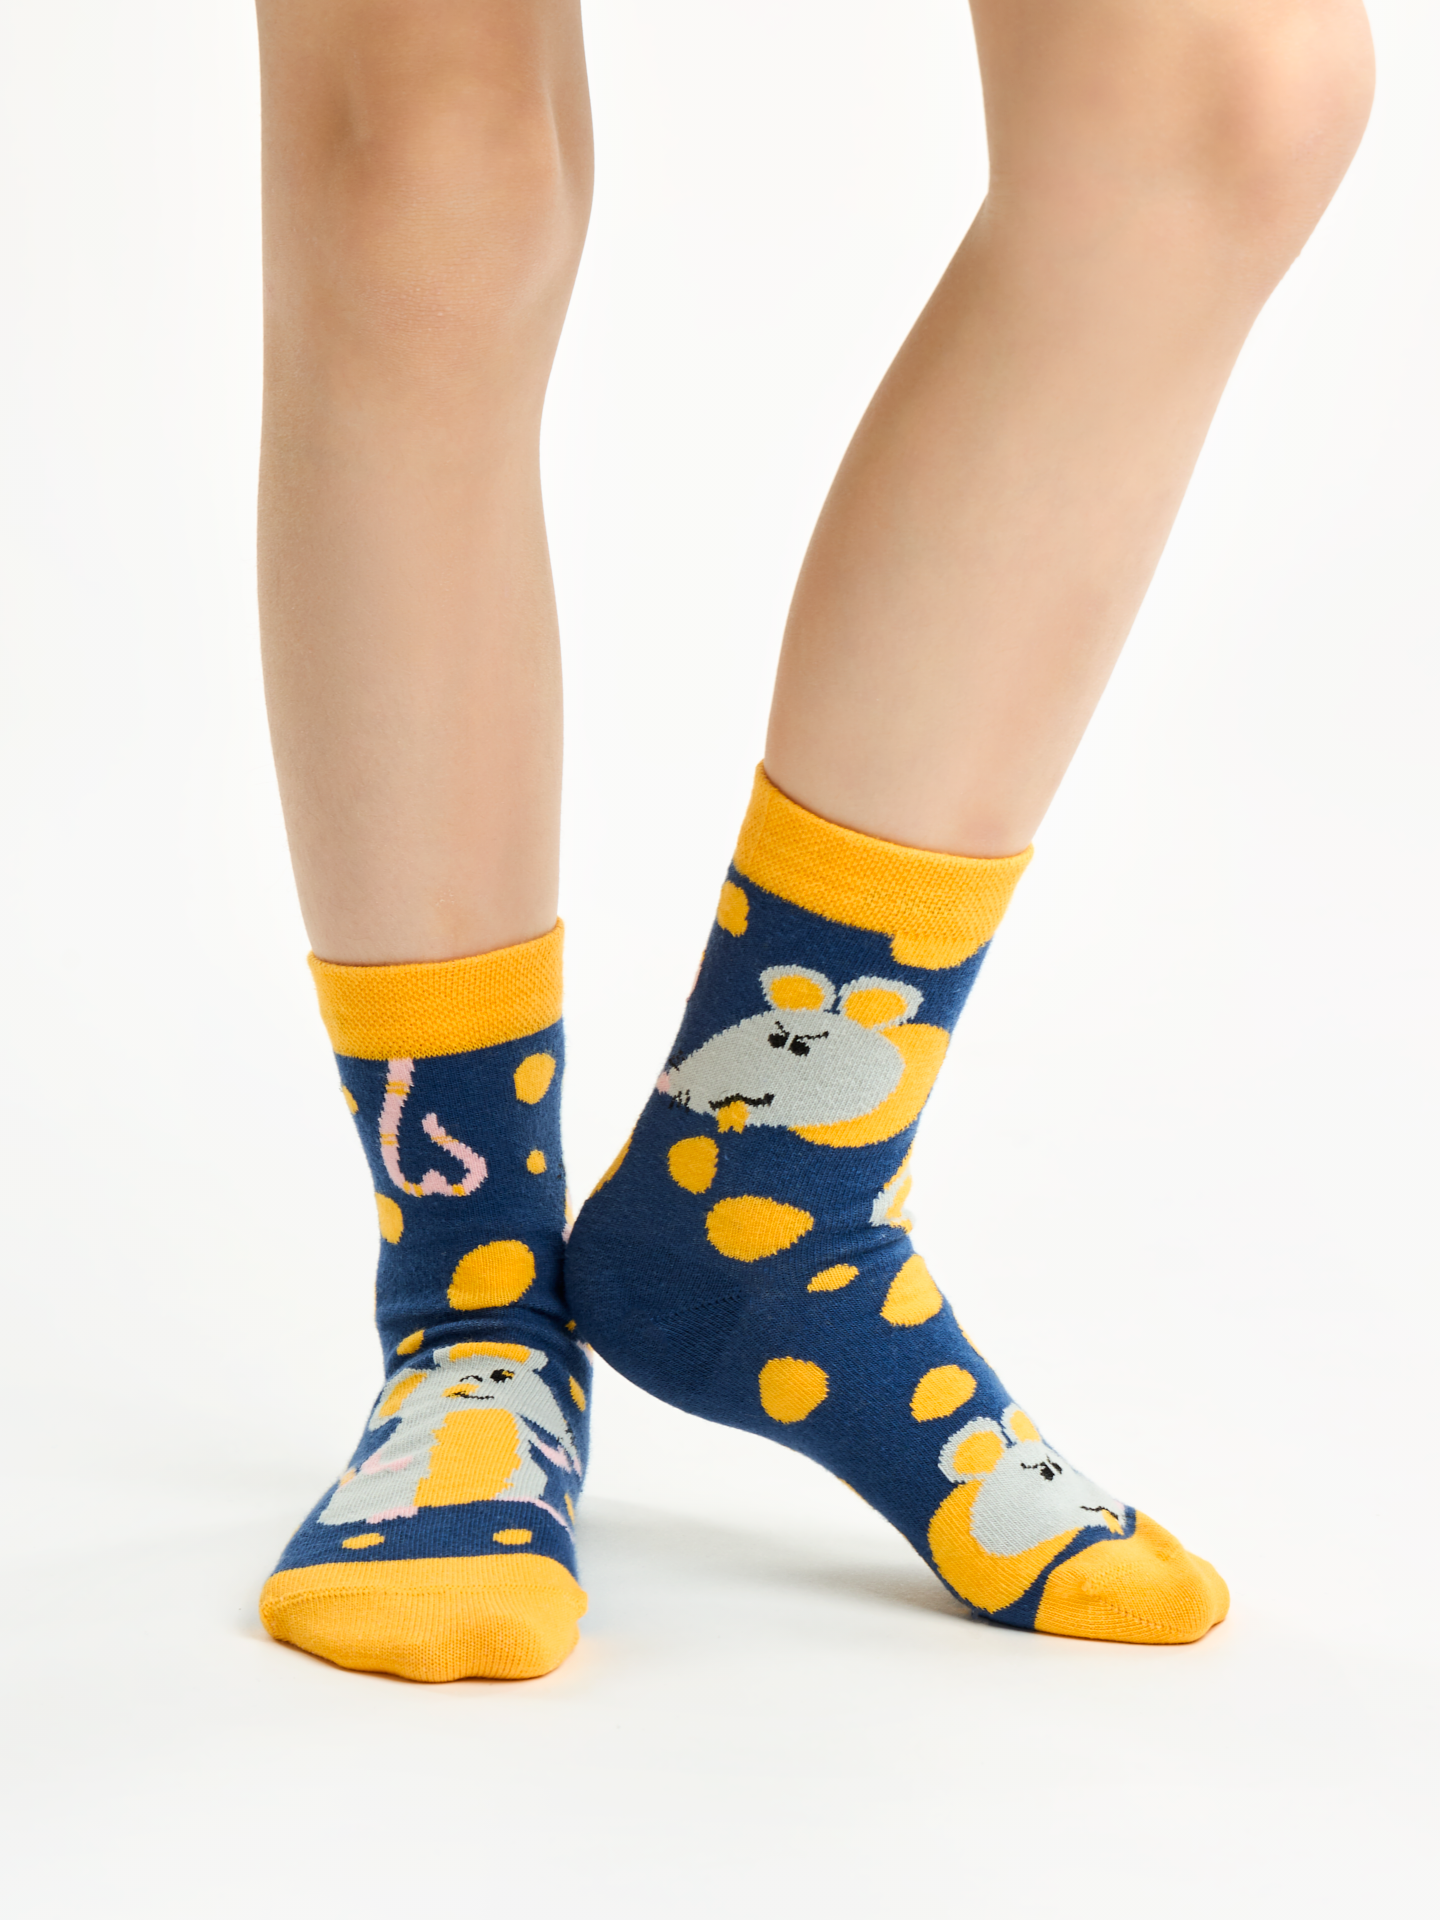 Kids' Socks Mouse & Cheese